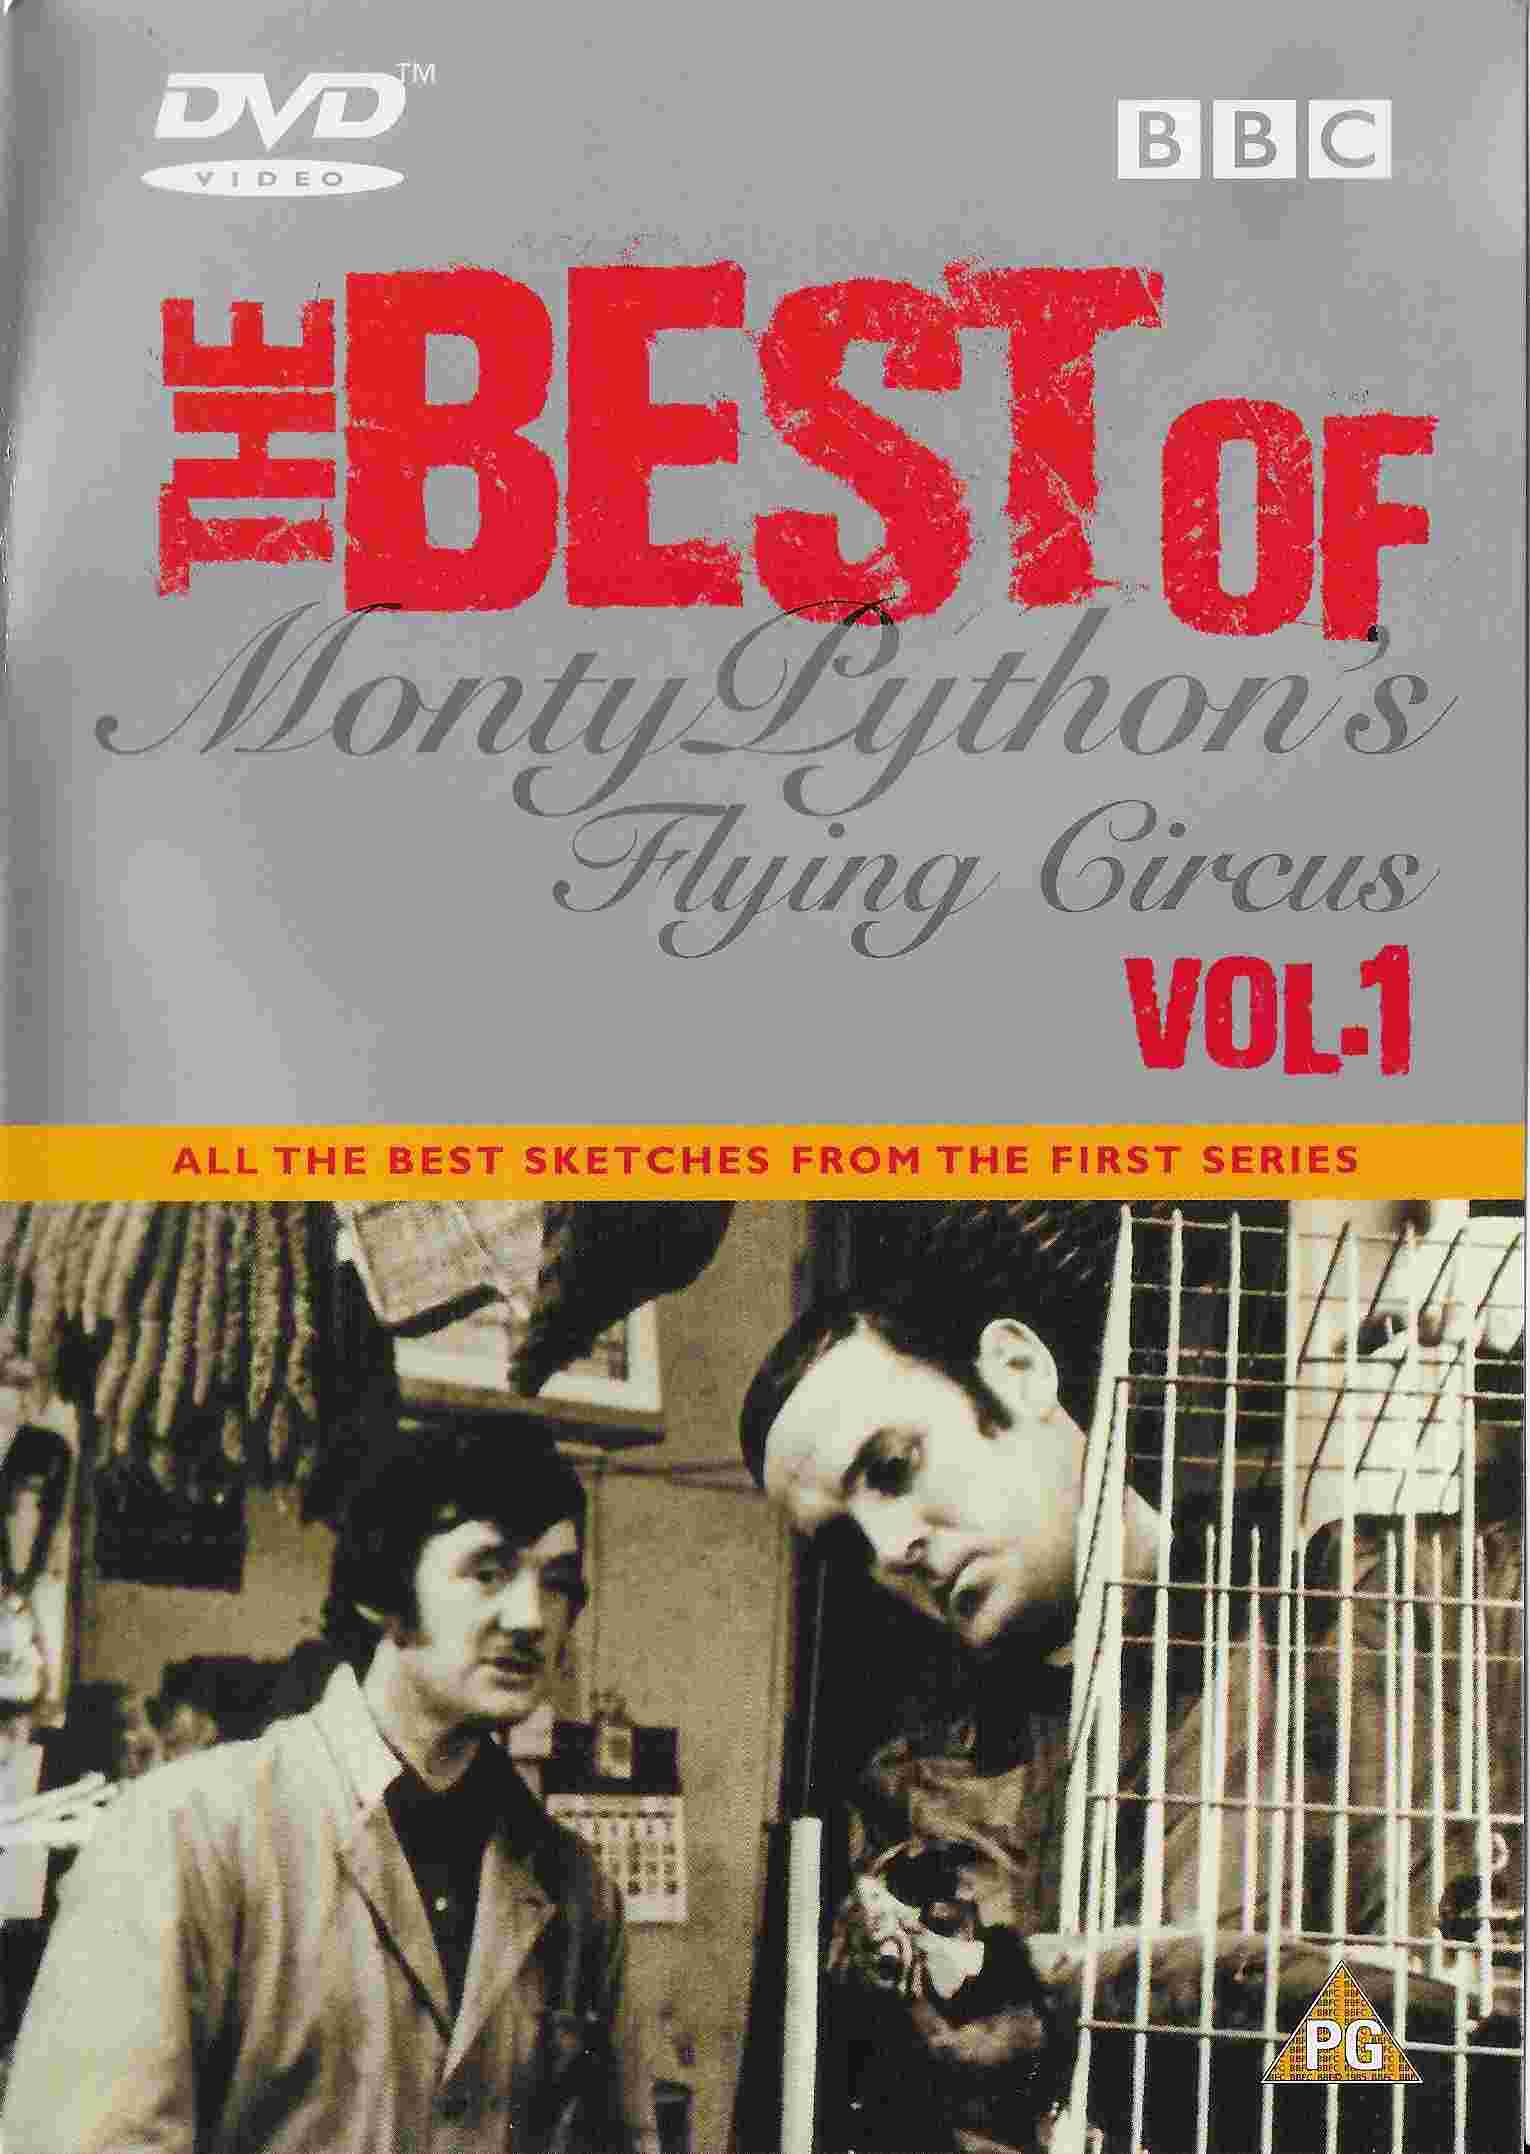 Picture of The best of Monty Python's flying circus - Volume 1 by artist Monty Python from the BBC dvds - Records and Tapes library